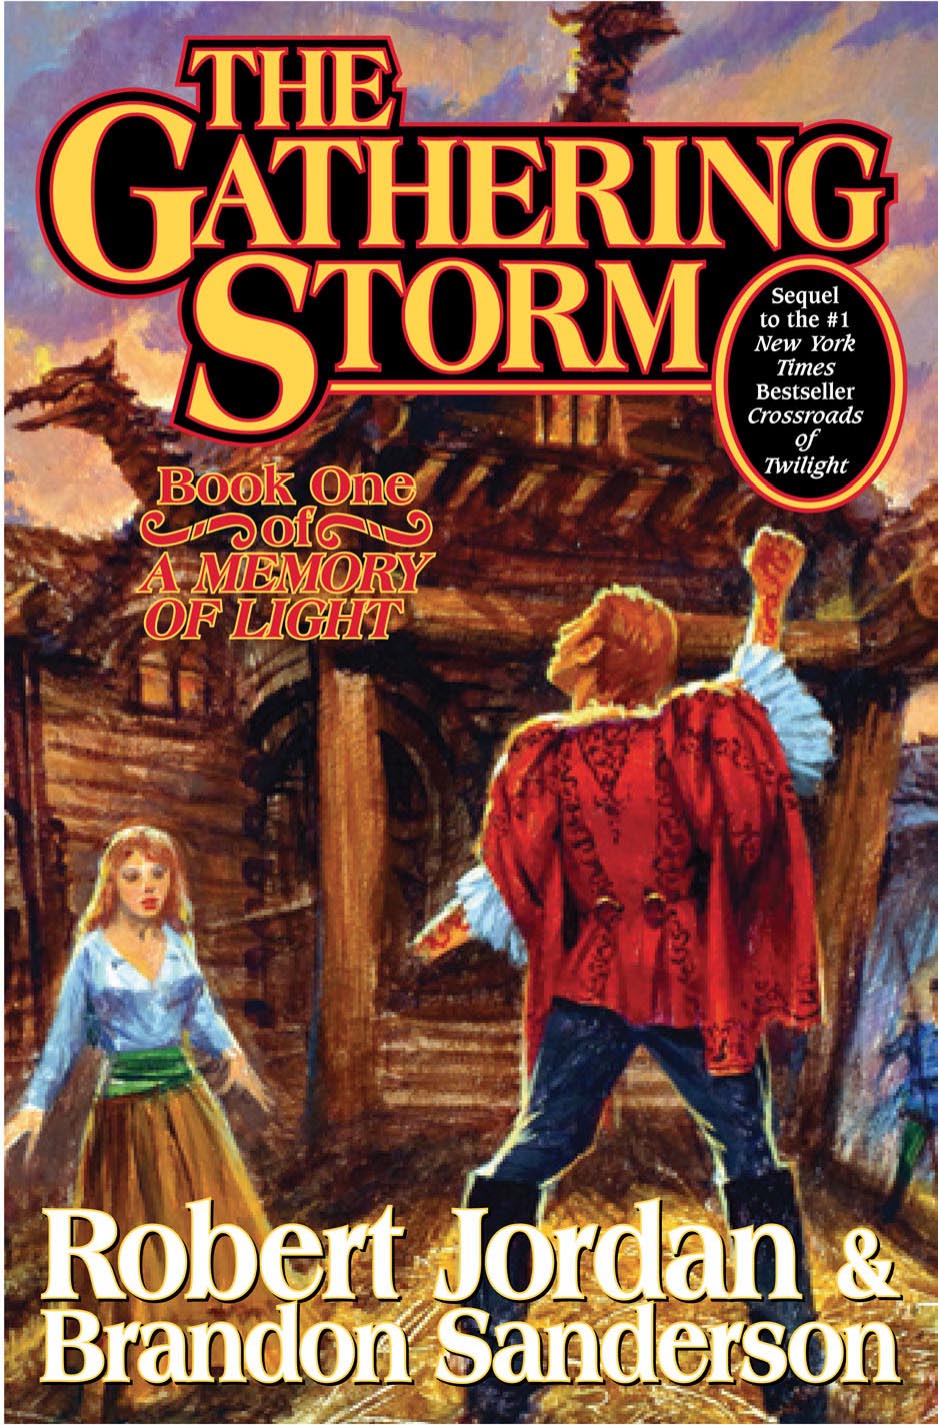 An Analysis of the Wheel of Time Books by Robert Jordan